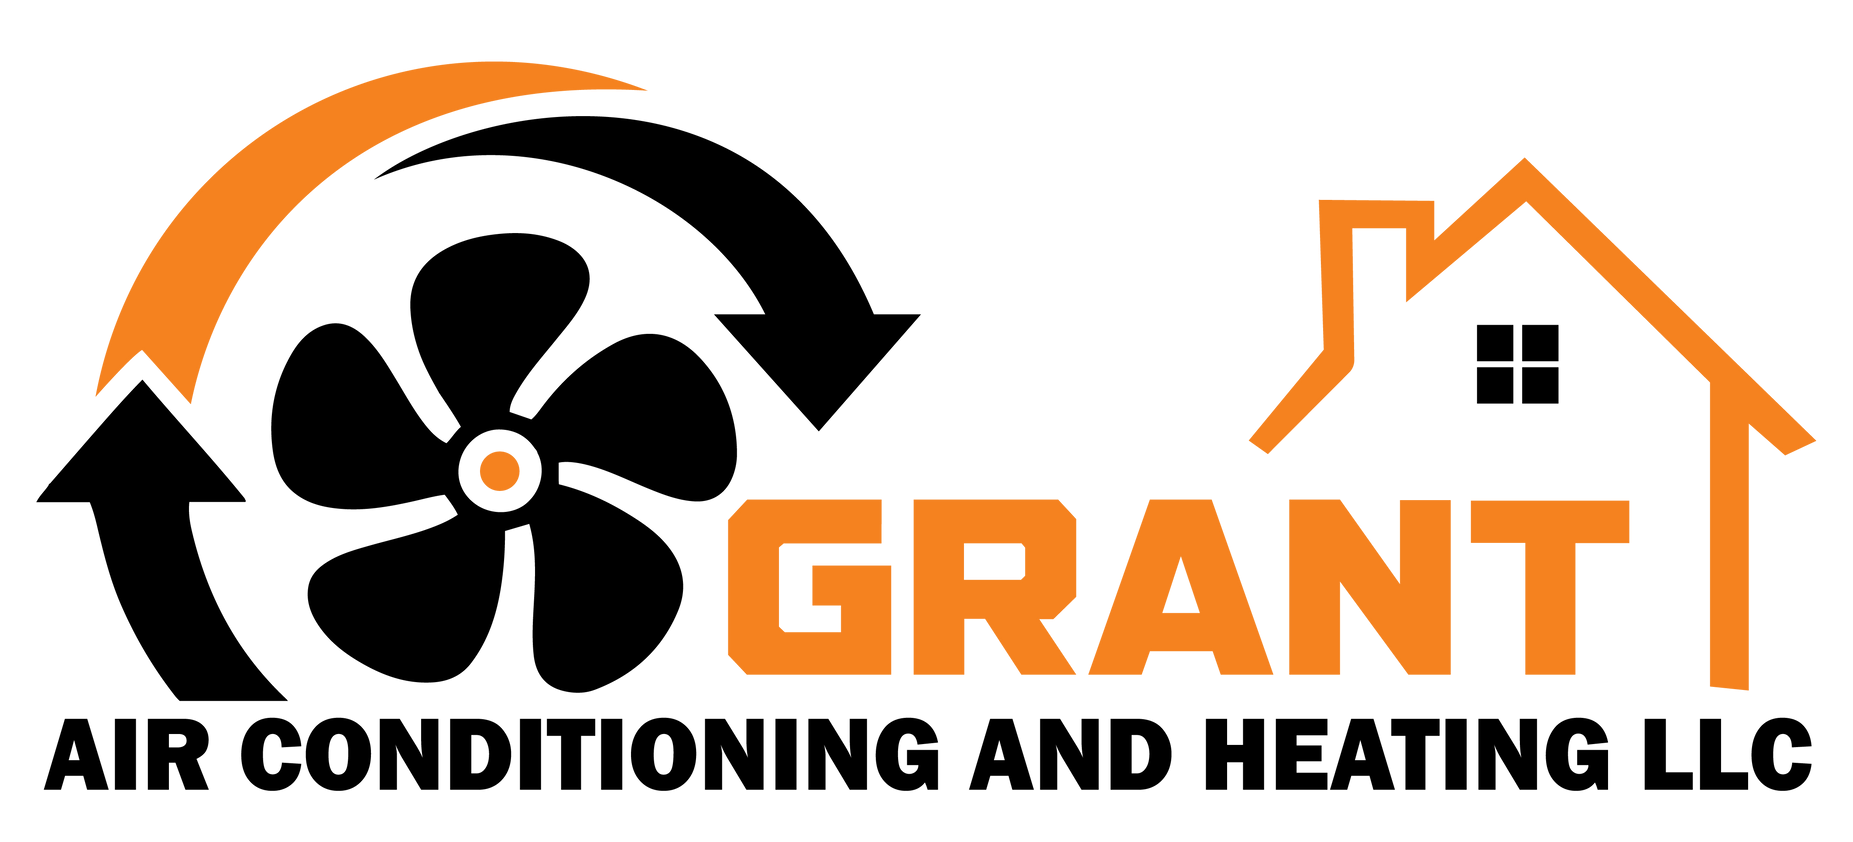 Grant Air Conditioning & Heating in Brandon, MS